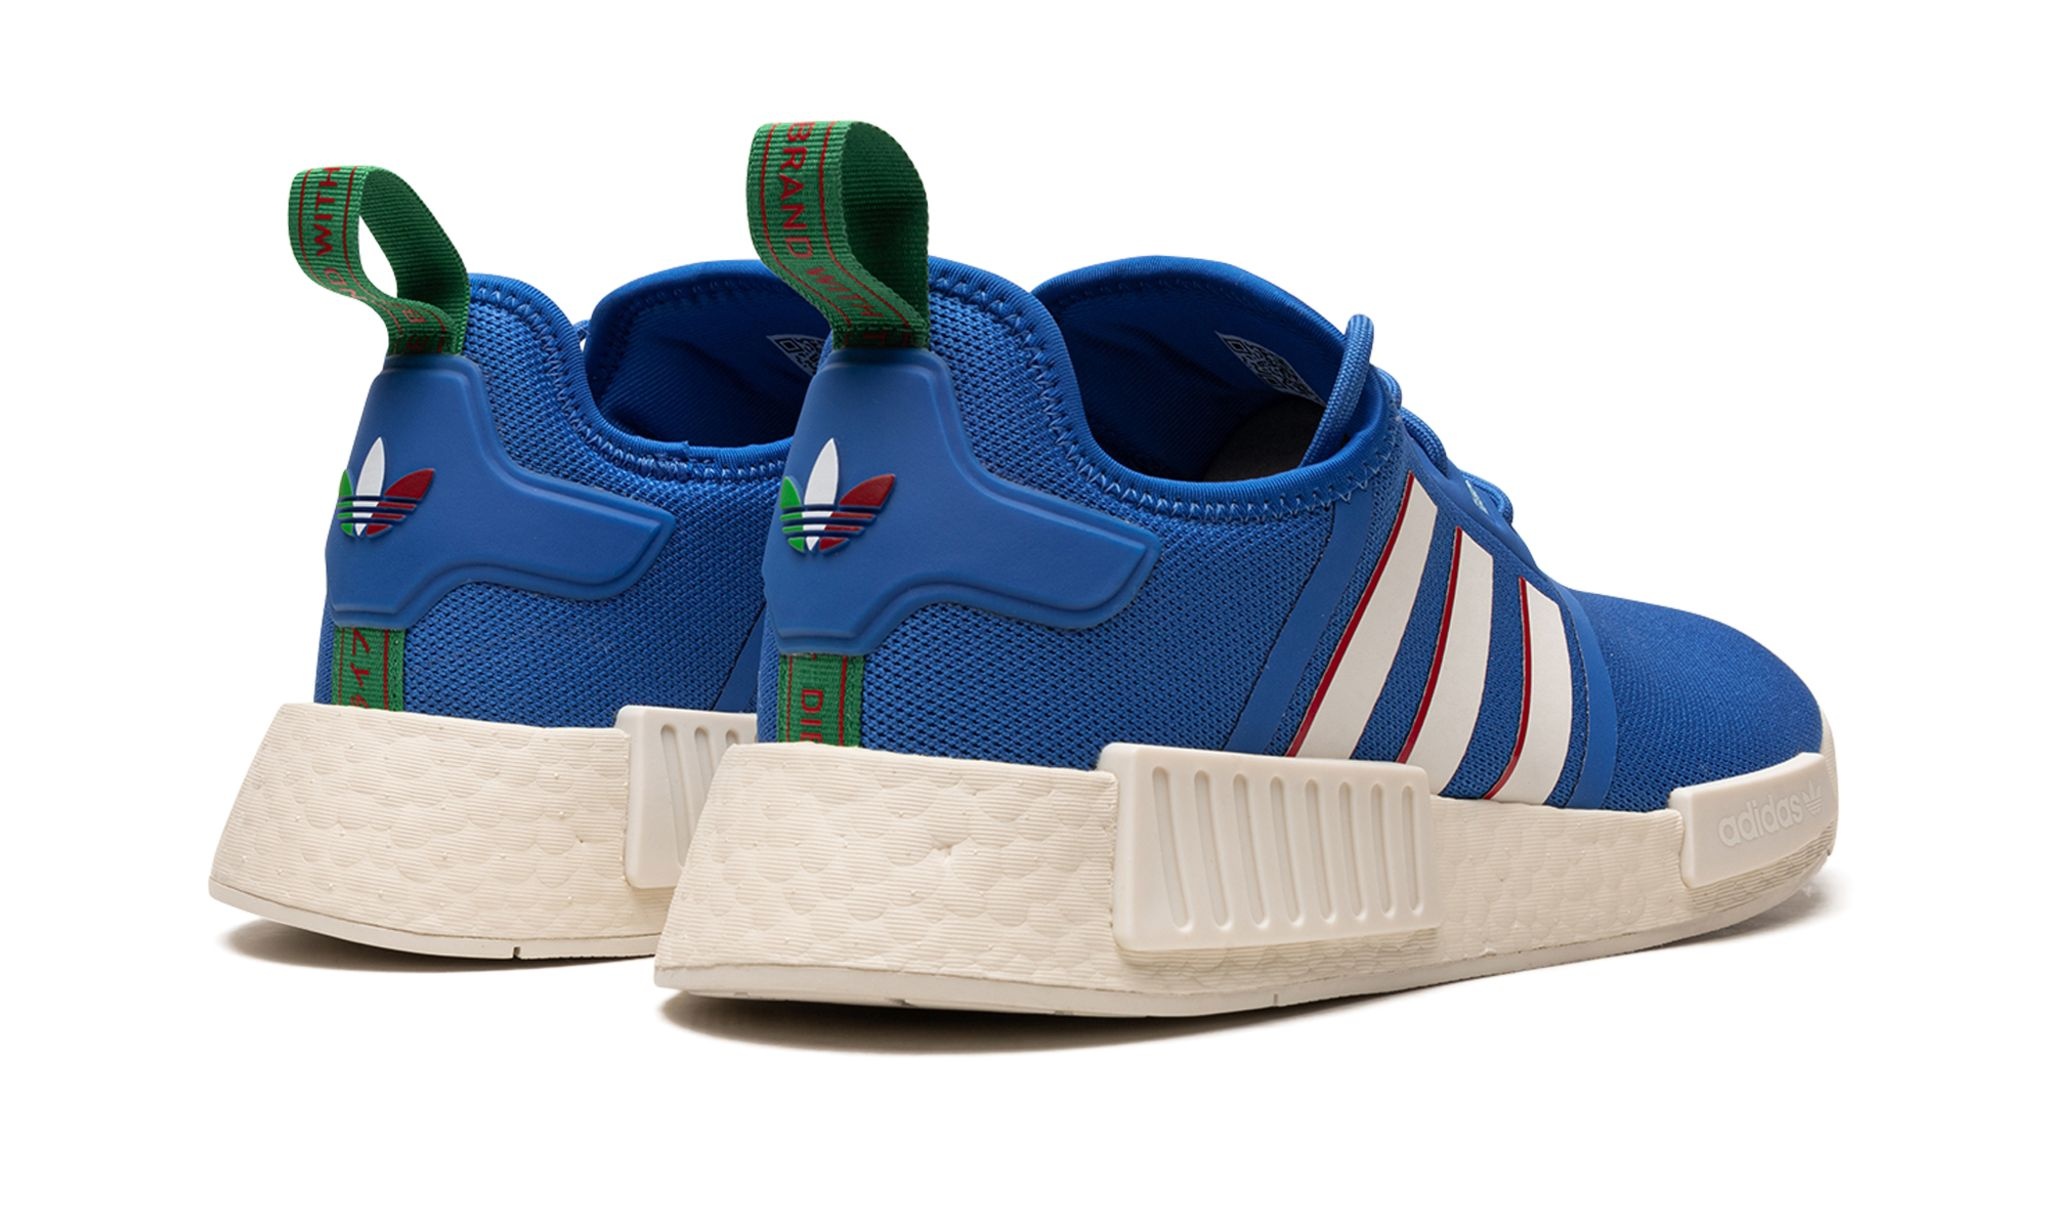 Nmd r1 "Red / Royal Blue / Off White" - 1